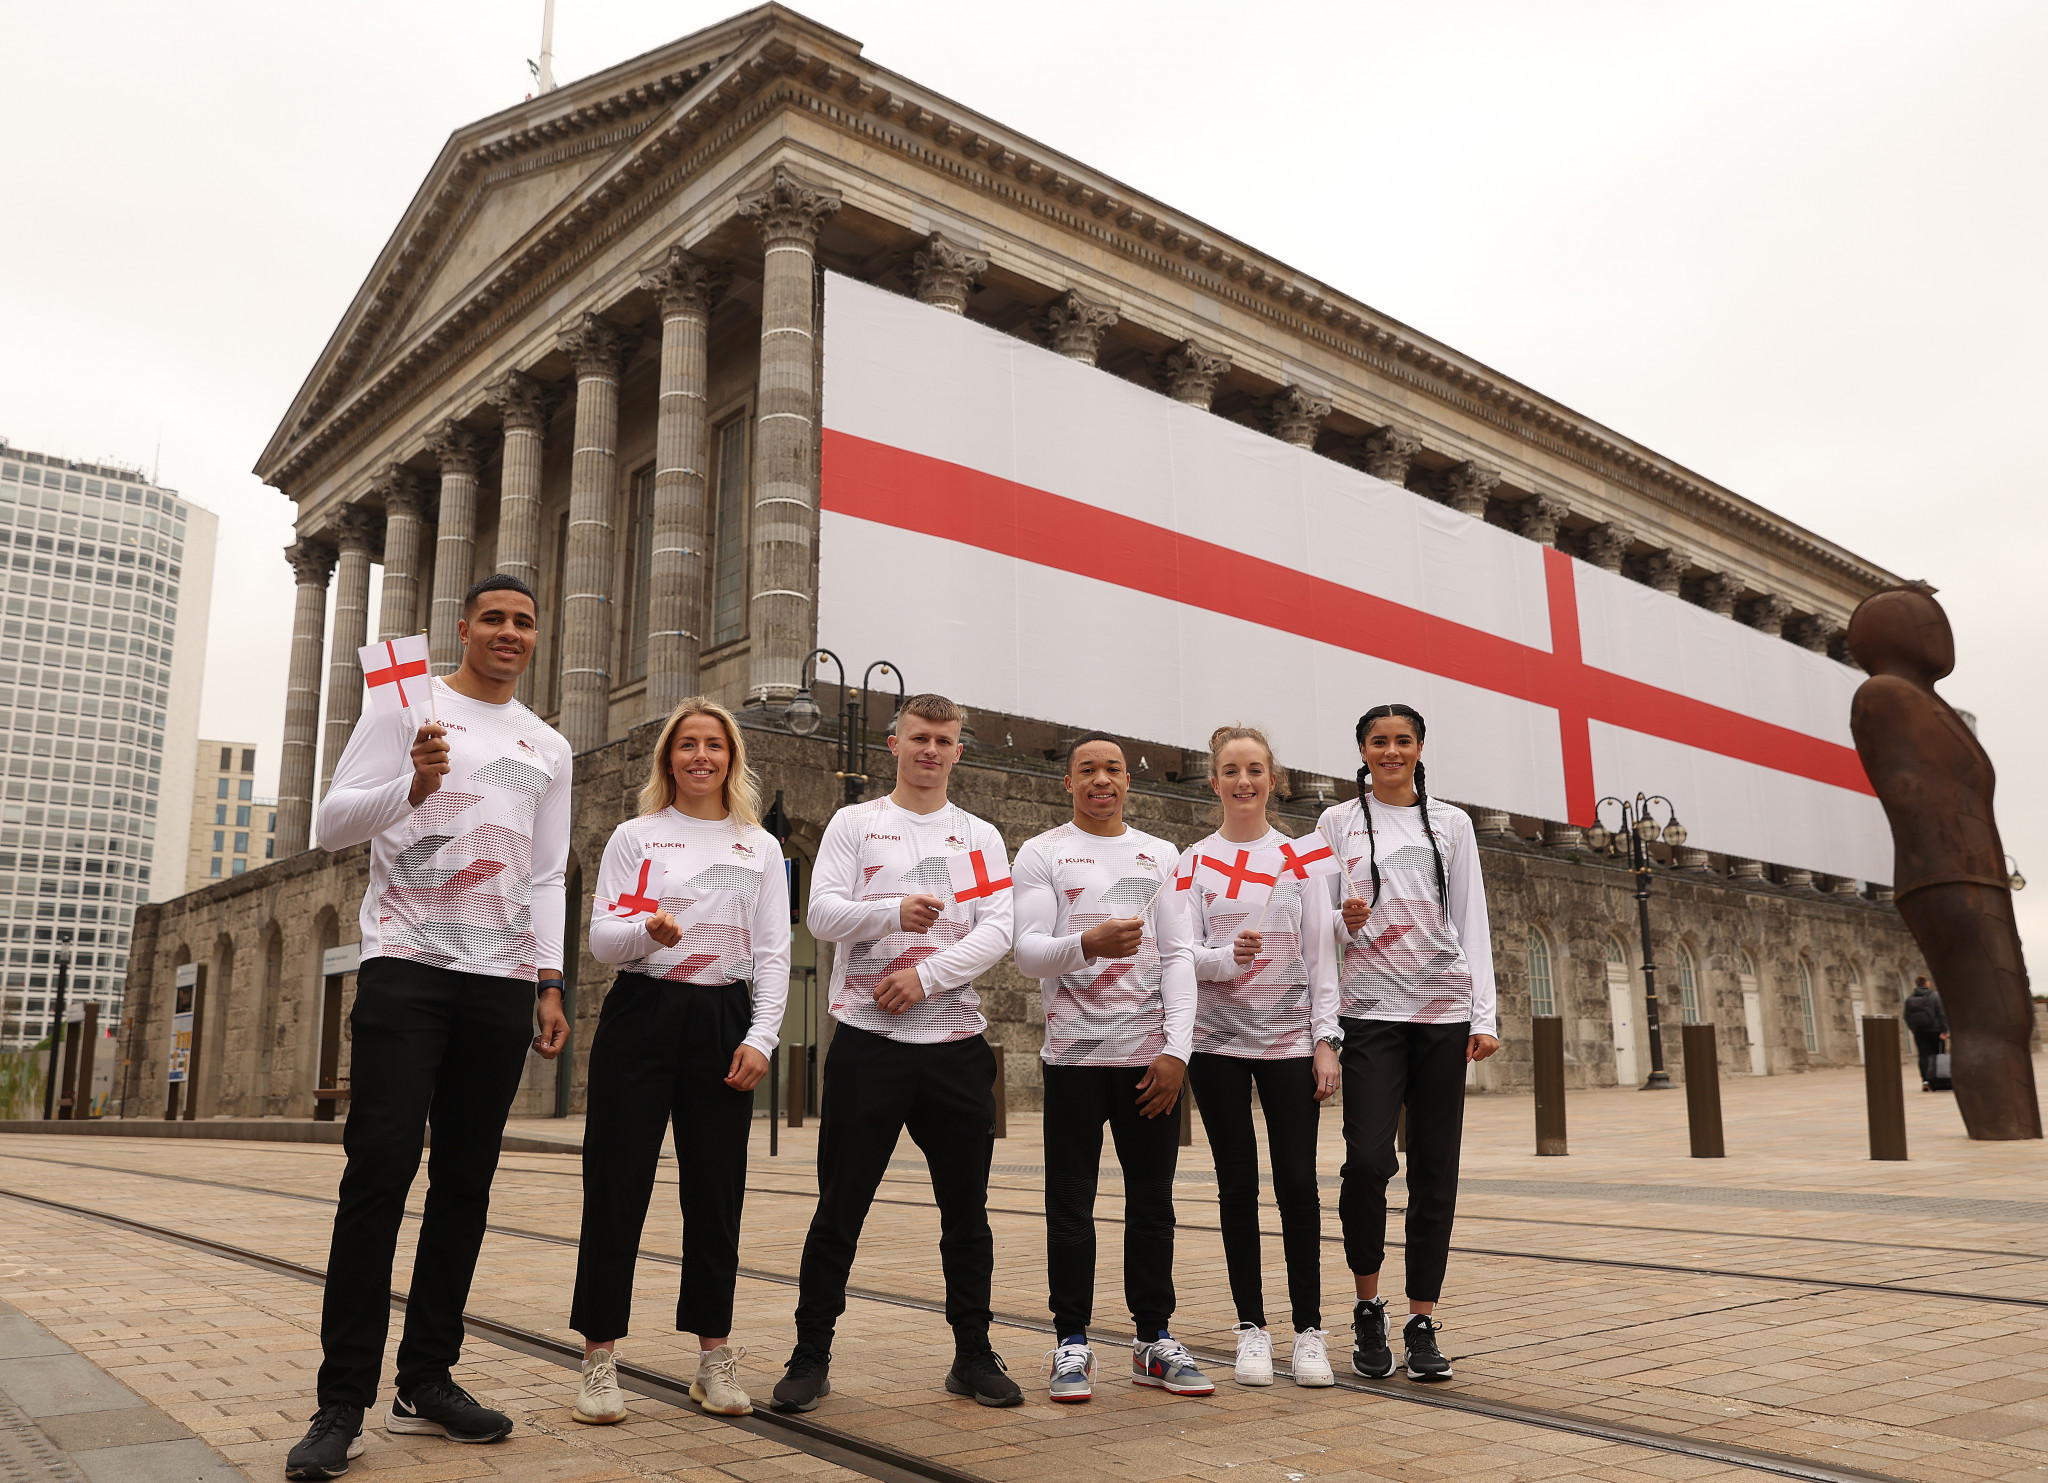 
Team England athletes from different sports were able to come together and celebrate St. George’s Day ©Birmingham City Council 